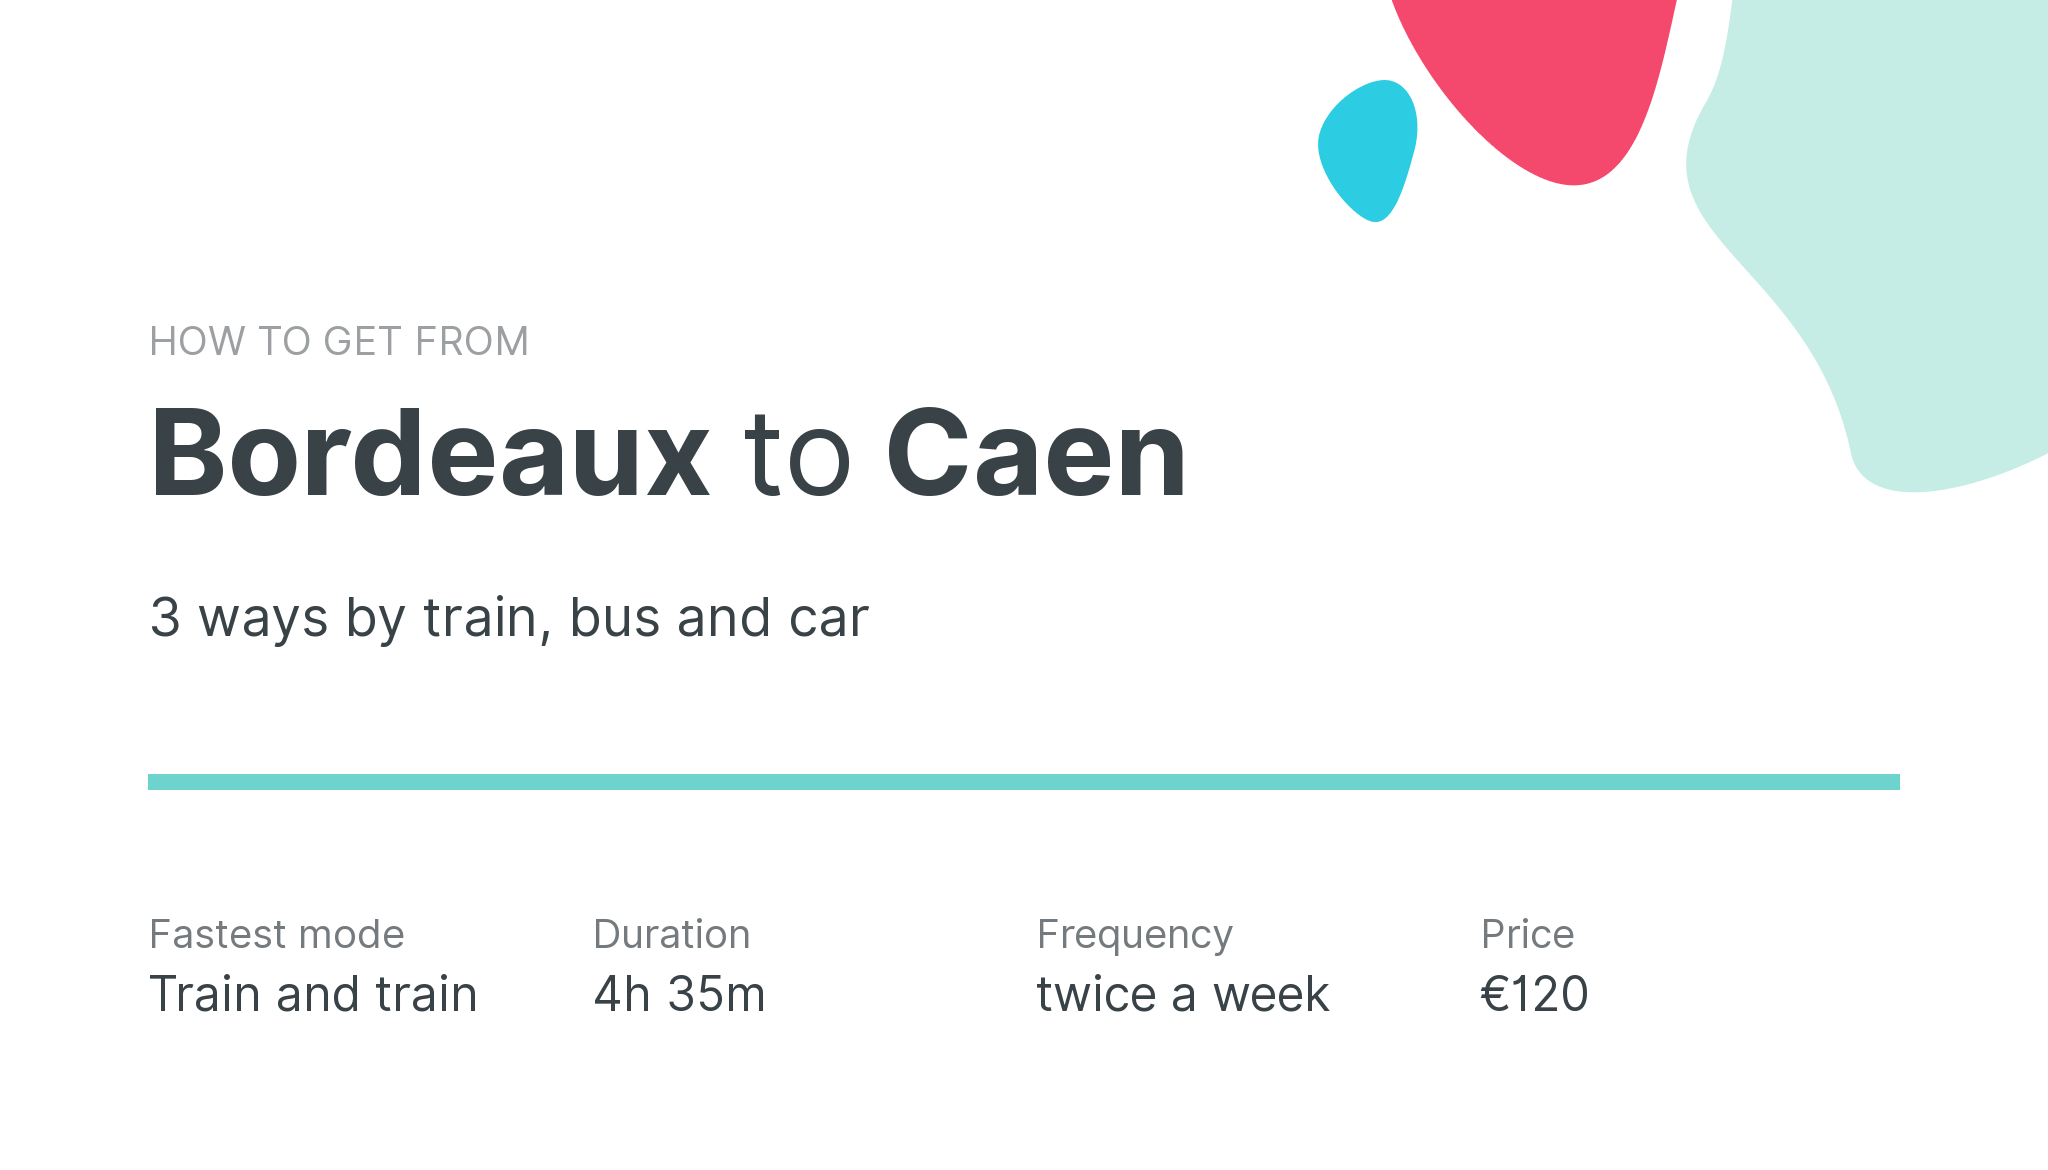 How do I get from Bordeaux to Caen